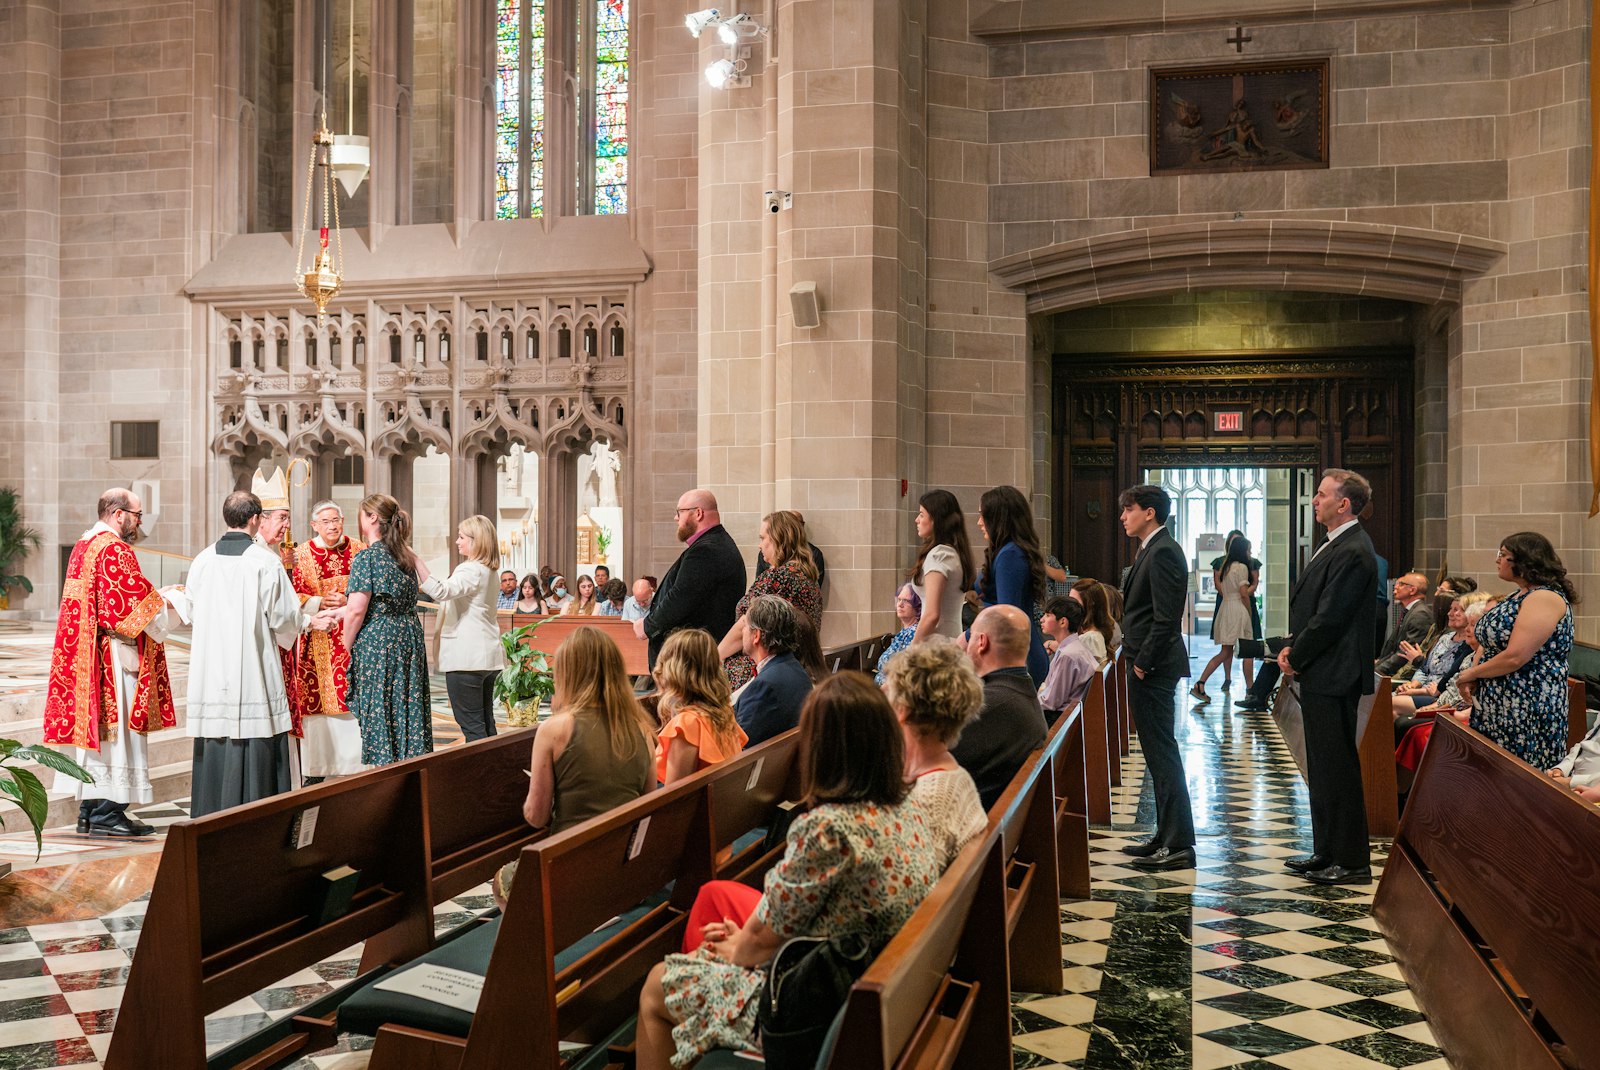 Through confirmation, all of the God-given gifts and talents one possesses become consecrated to the work of the mission to bring the world back into the embrace of God the Father, the archbishop said.